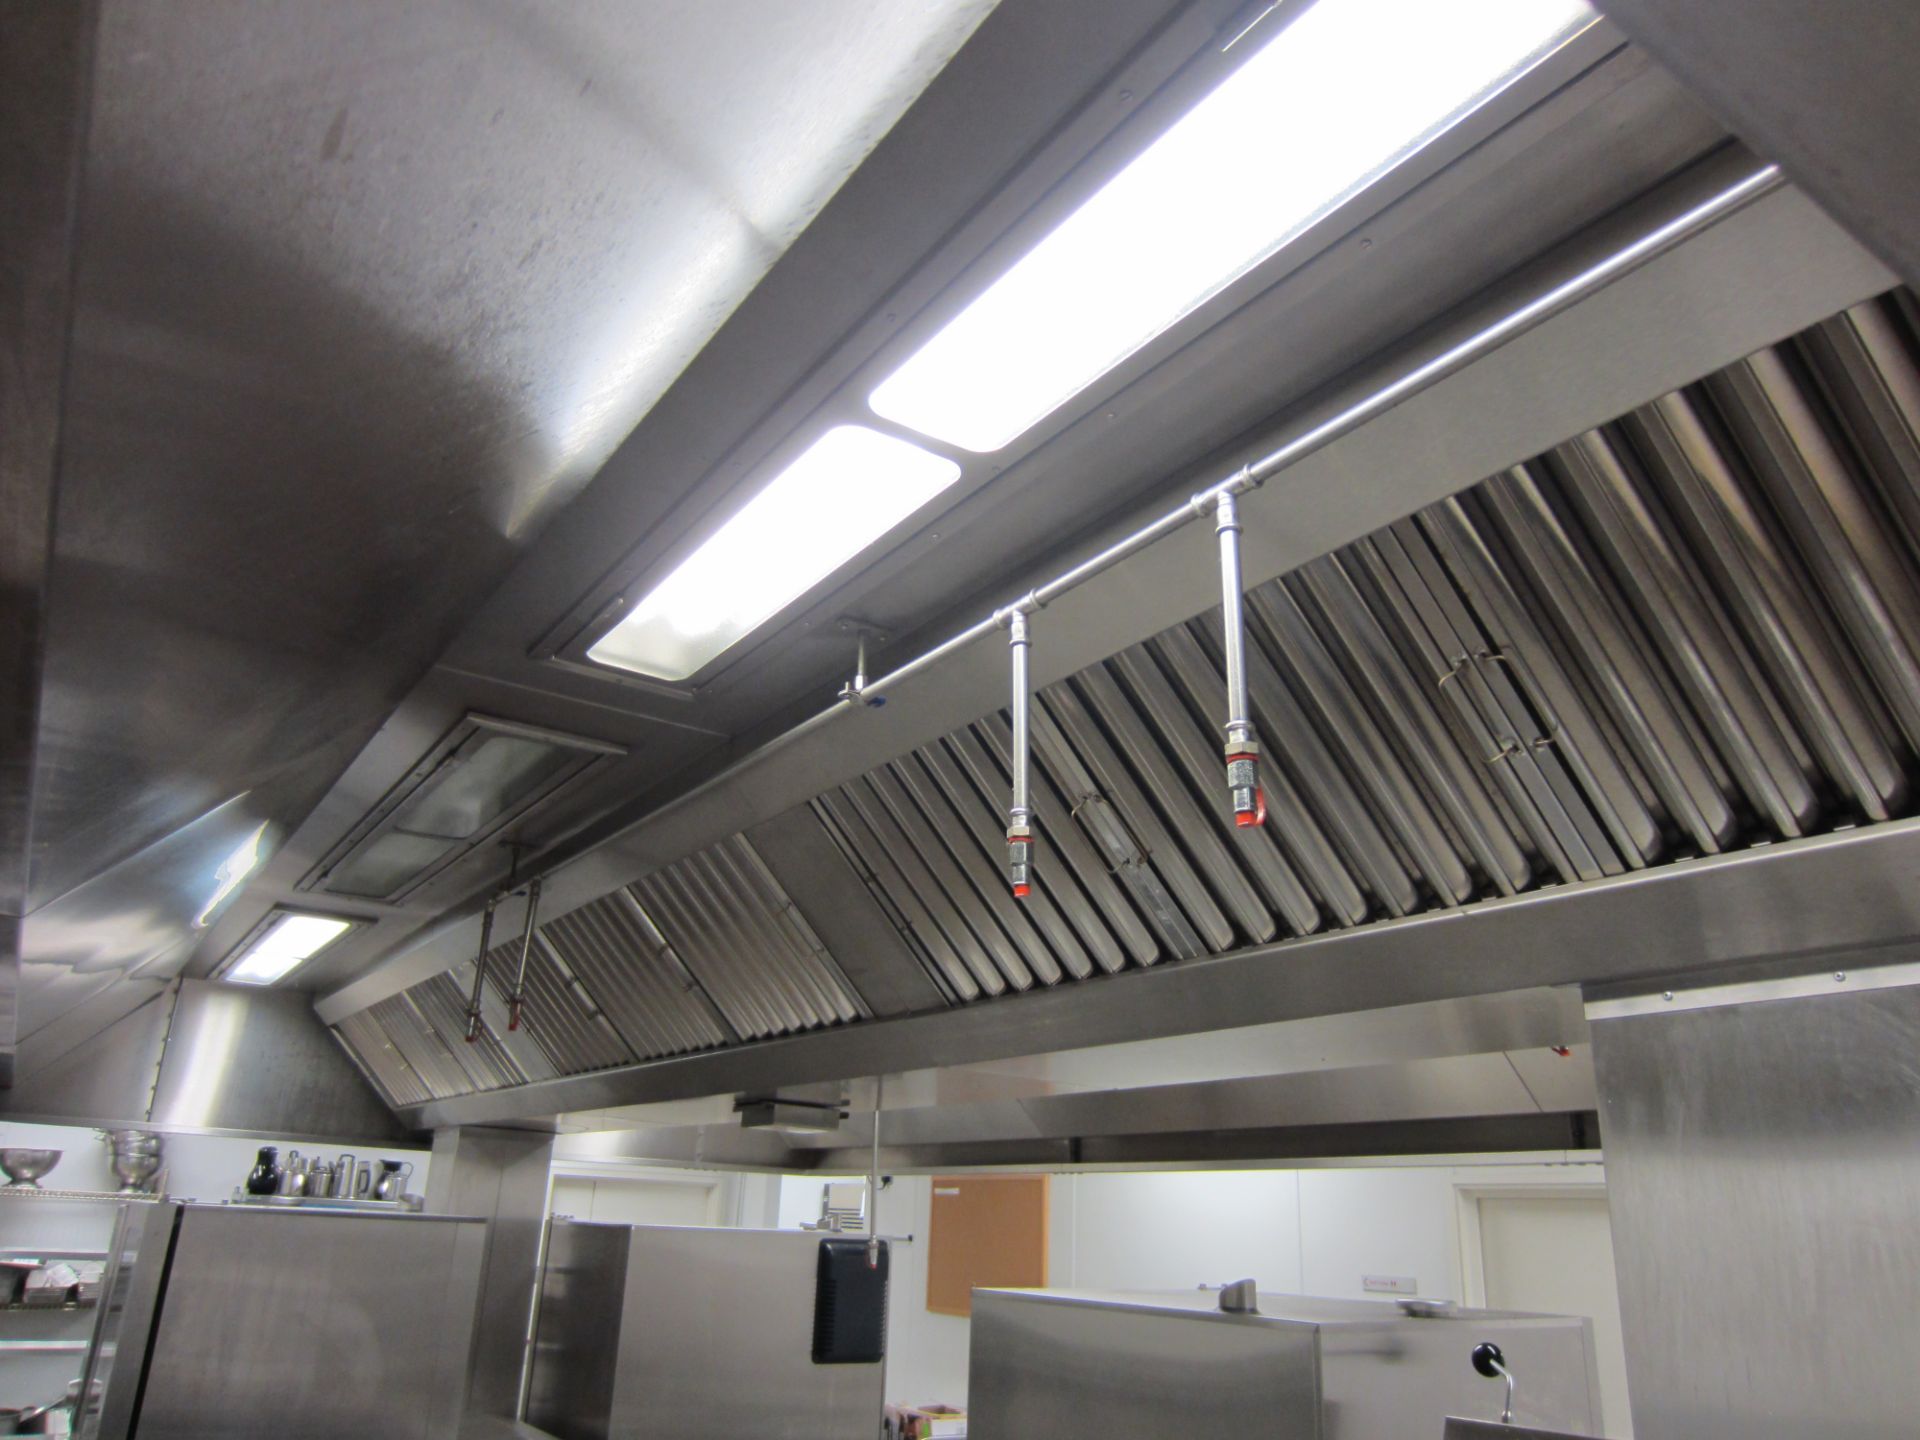 Large Overhead Stainless Steel Extraction Hood Incorporating Fire Suppression System - Image 5 of 7